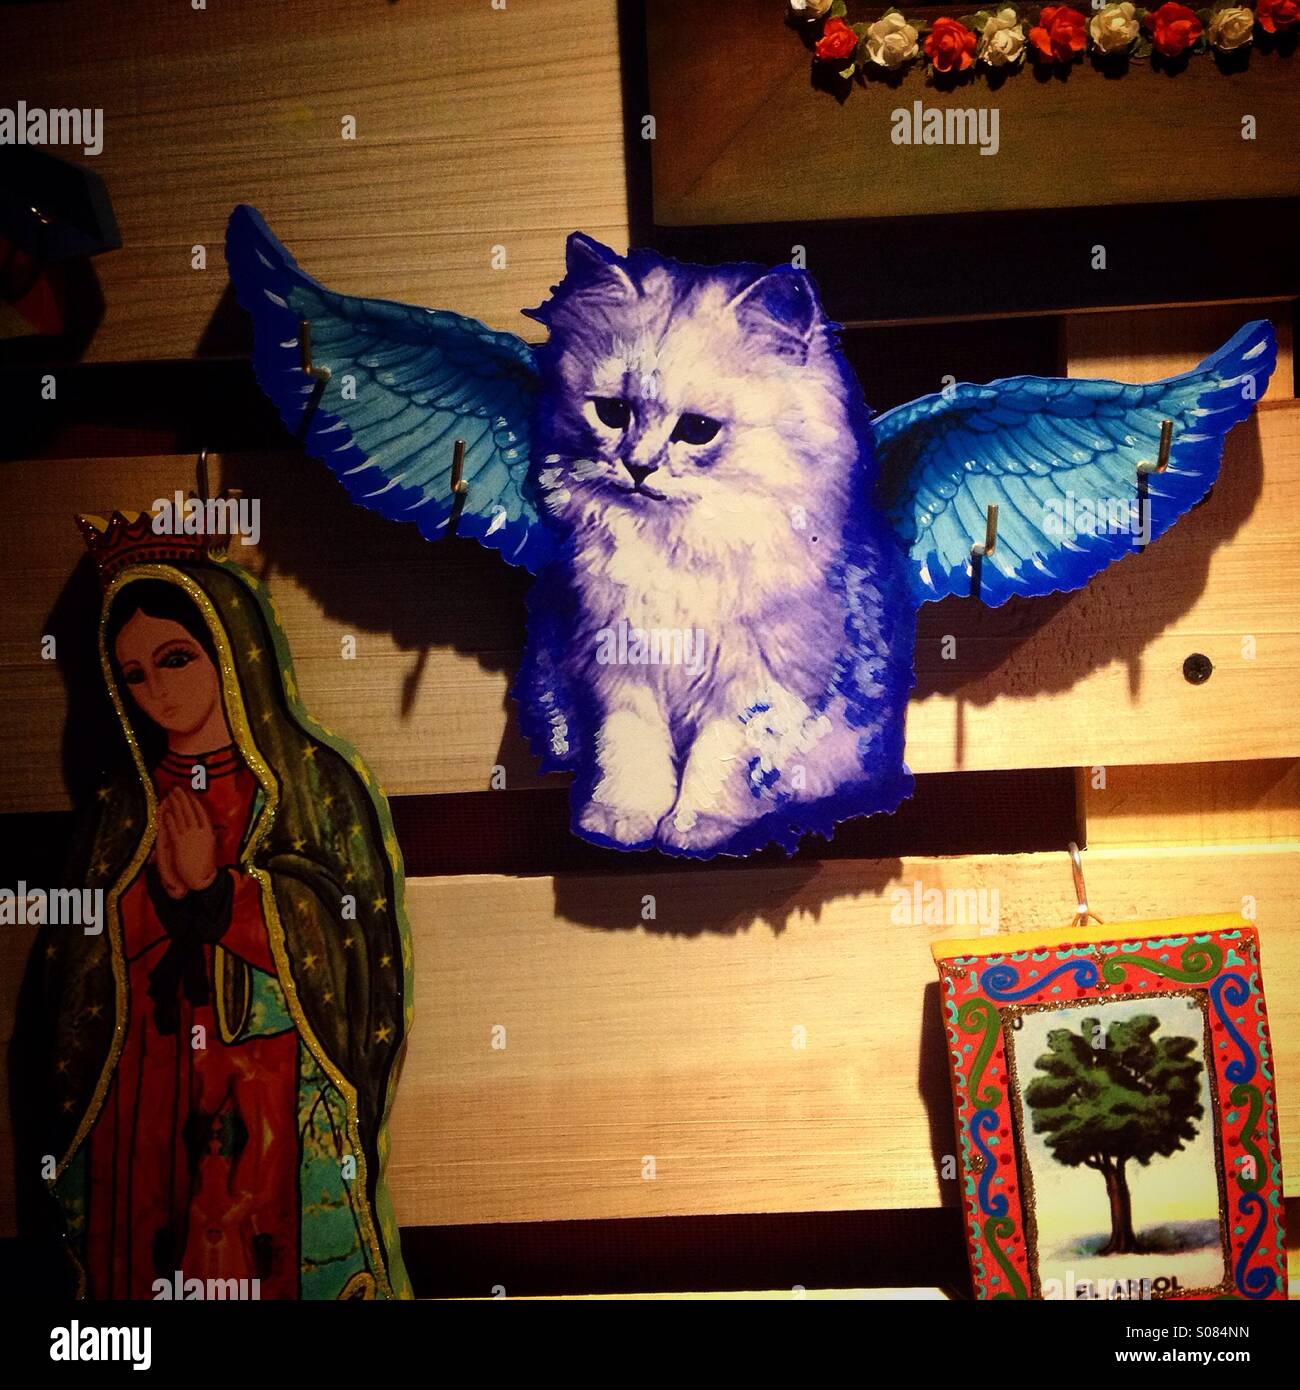 Folk art with an image of a winged white cat flying, an image of Our Lady of Guadalupe and the tree Tarot cart decorates La Luna de Romelia crafts workshop in Mexico City Stock Photo